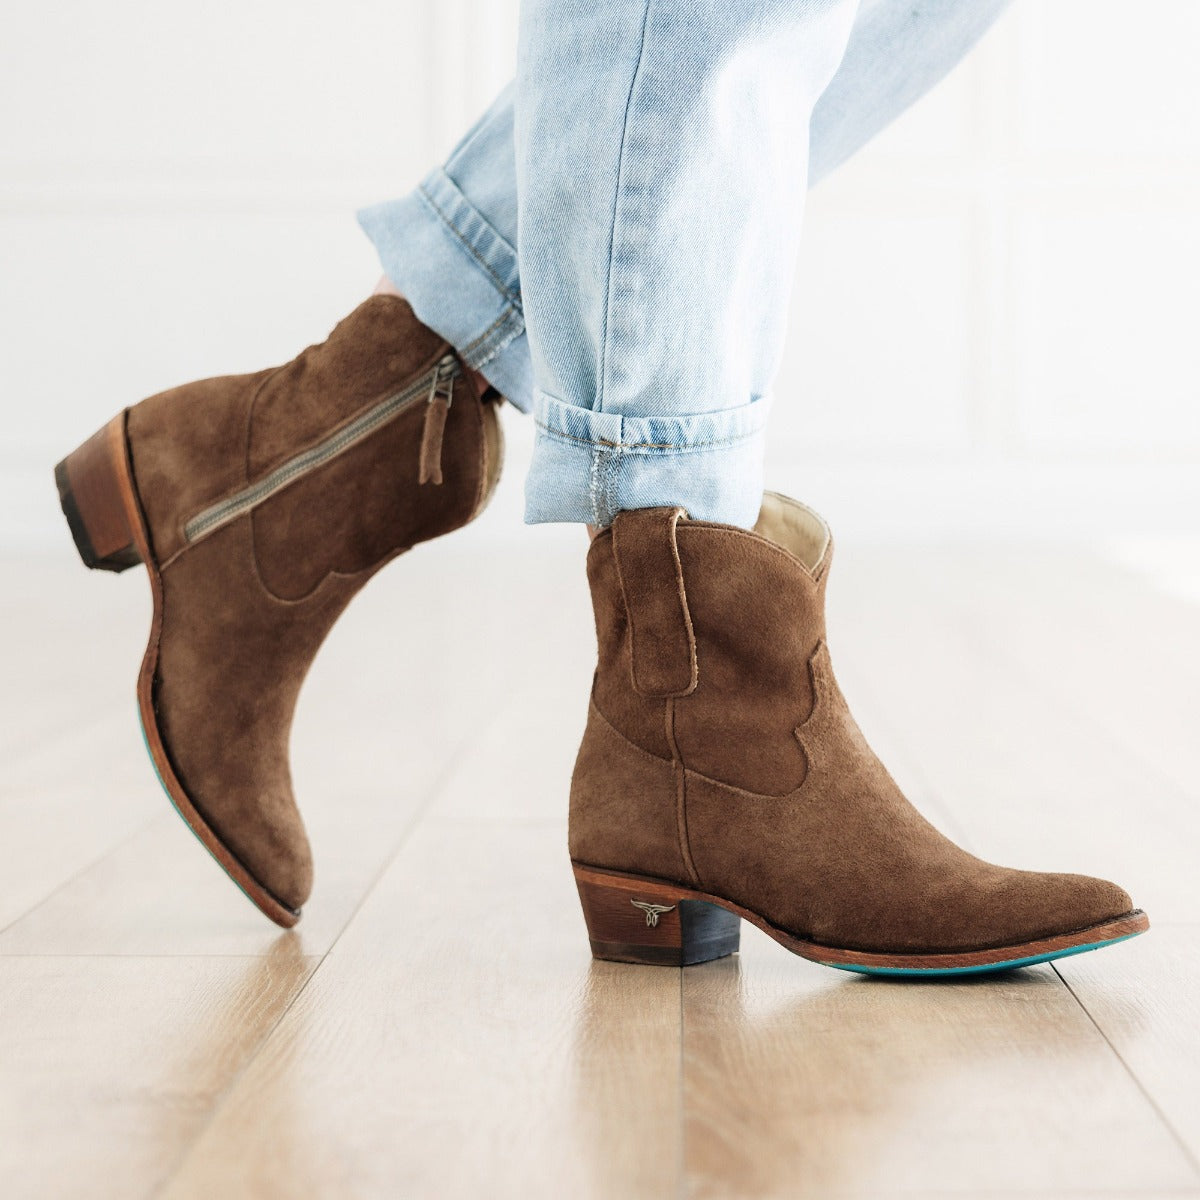 Plain Jane Bootie Women's Brown Suede Leather Western Ankle Boots